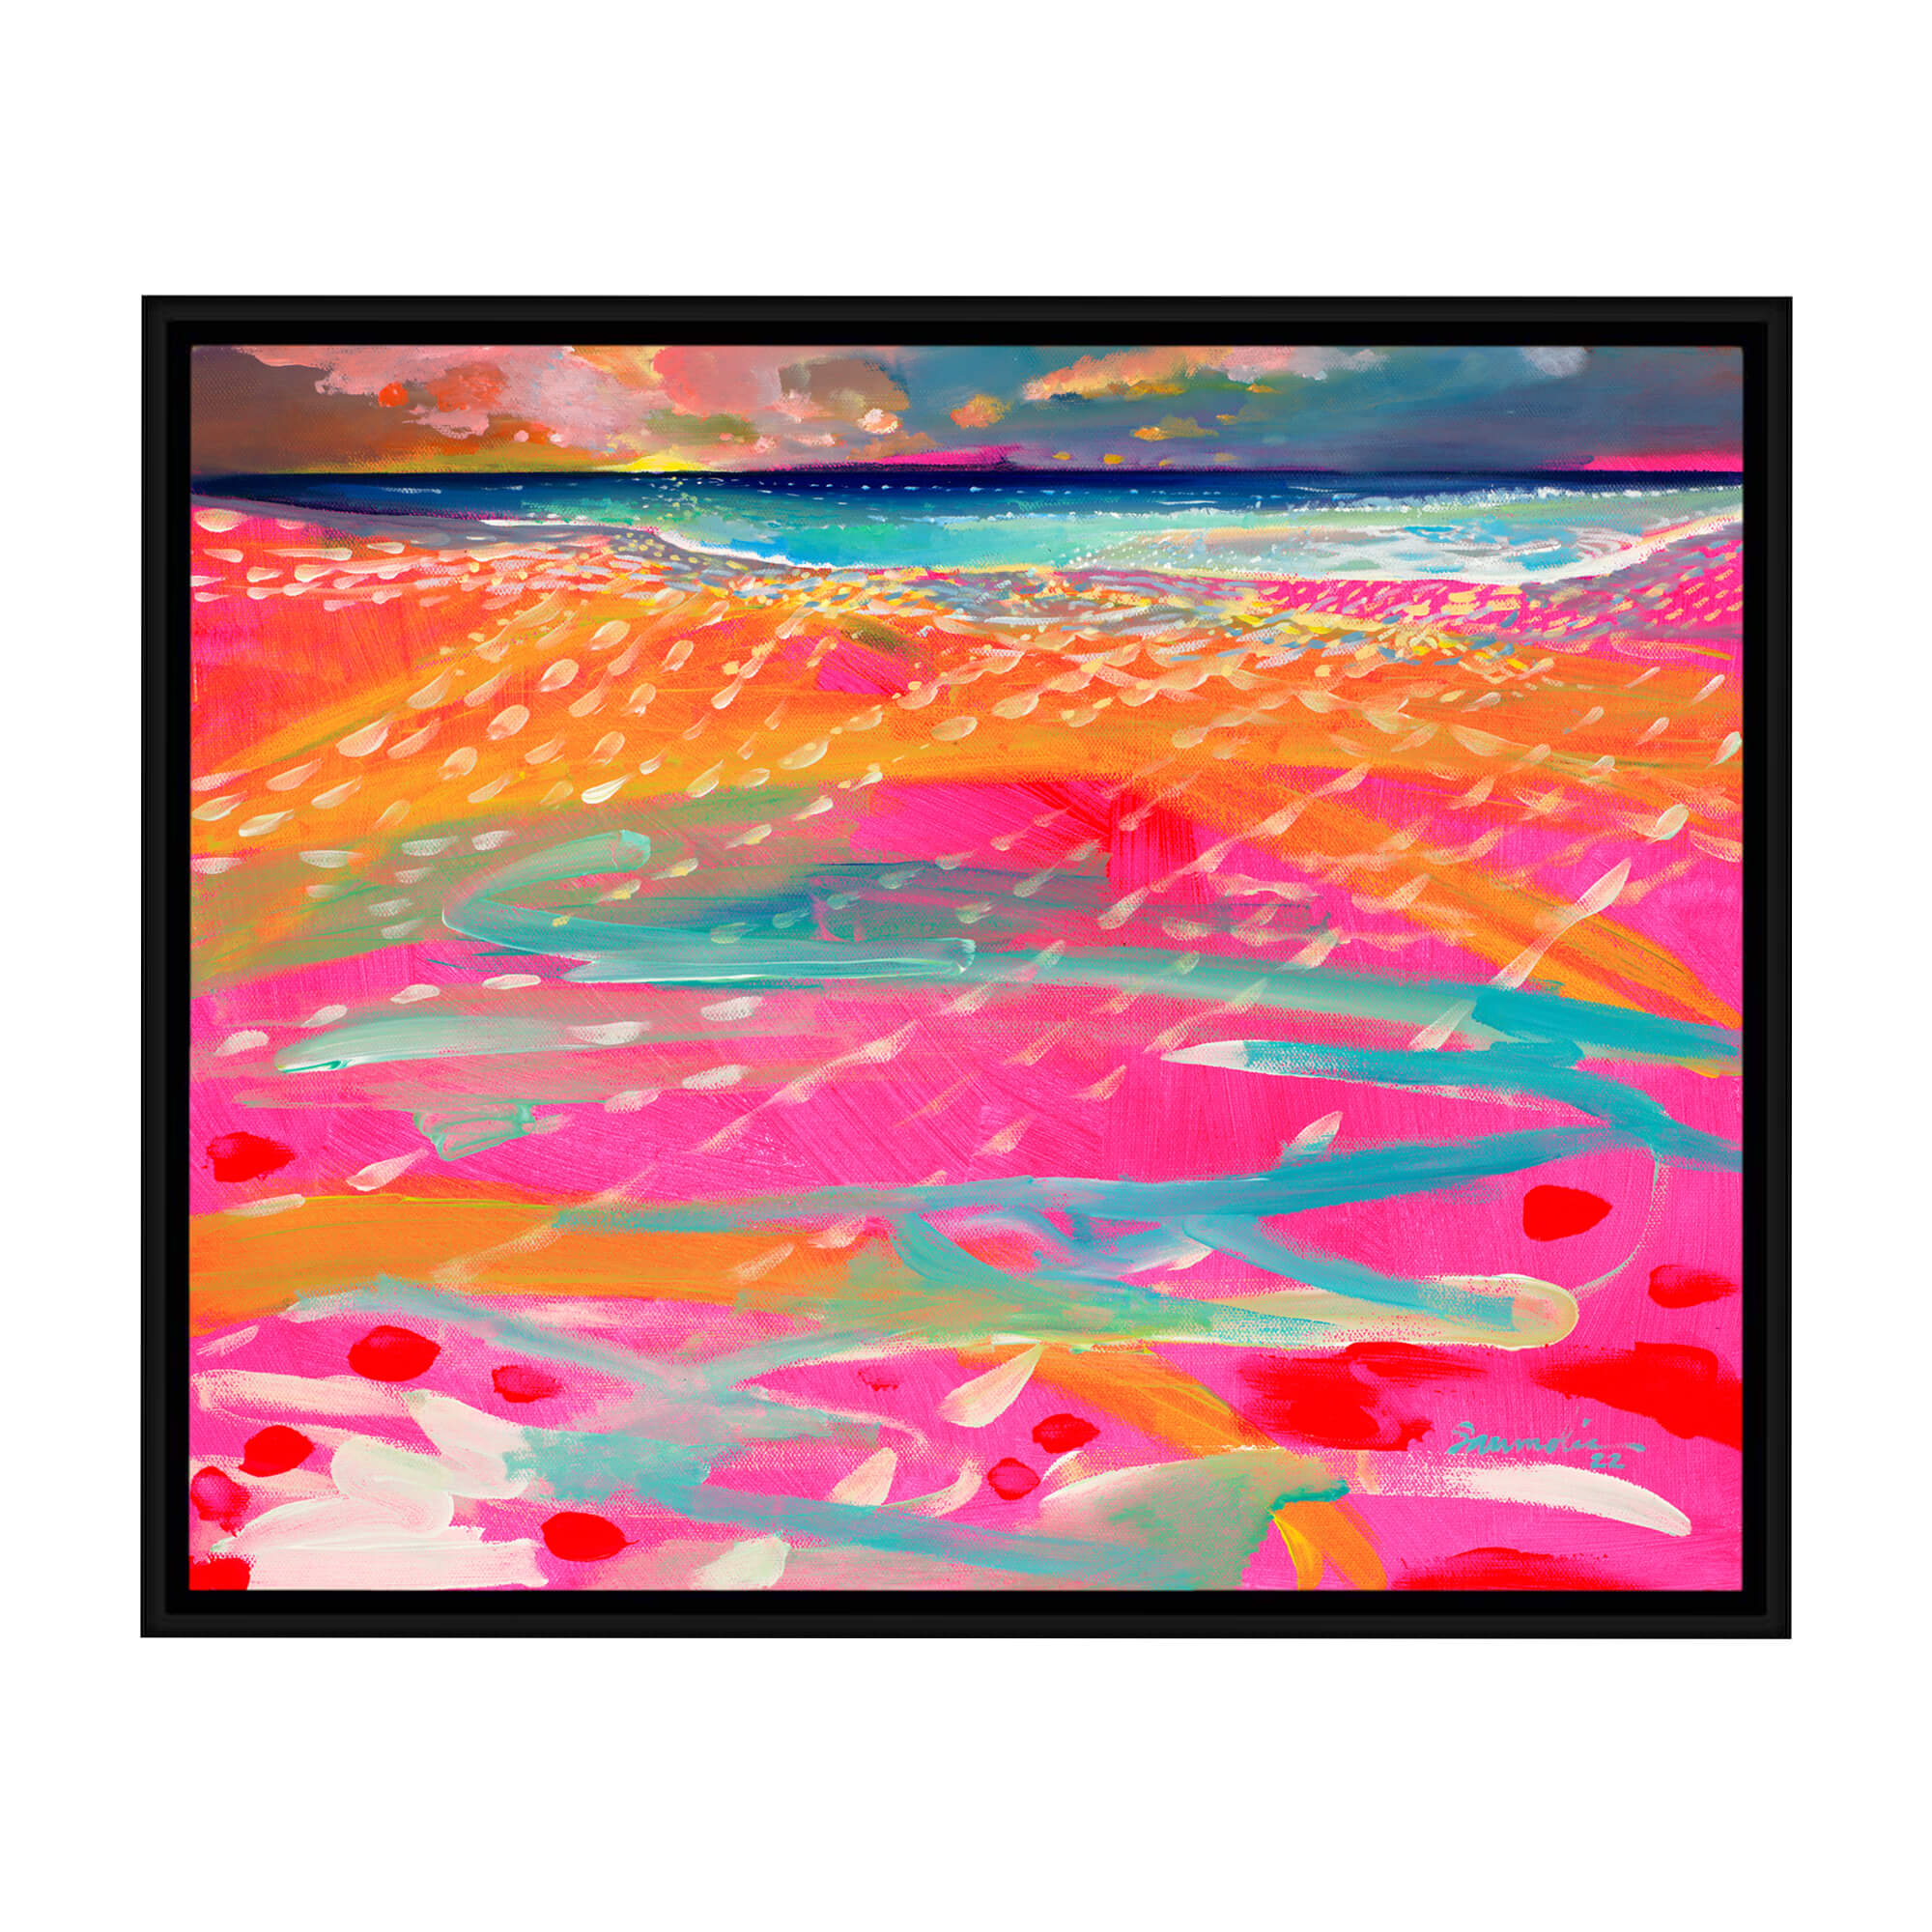 A framed canvas giclée art print featuring this beautiful vibrant neon-colored seascape by popular Hawaii artist Saumolia Puapuaga